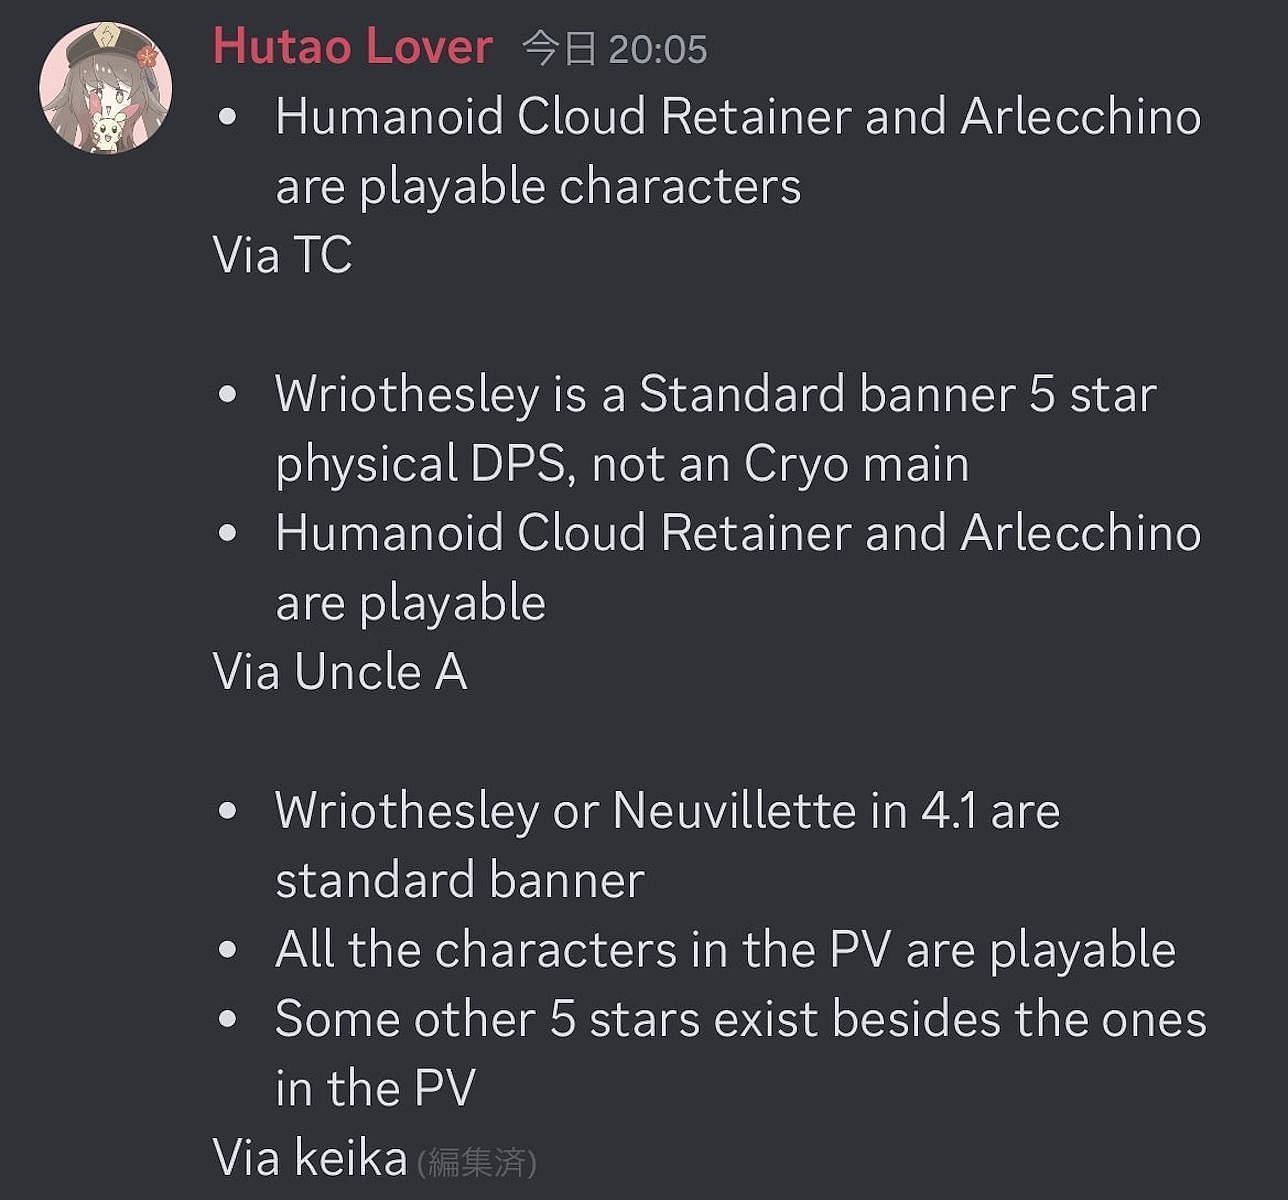 An old text leak referencing Cloud Retainer as being playable (Image via HutaoLover77)